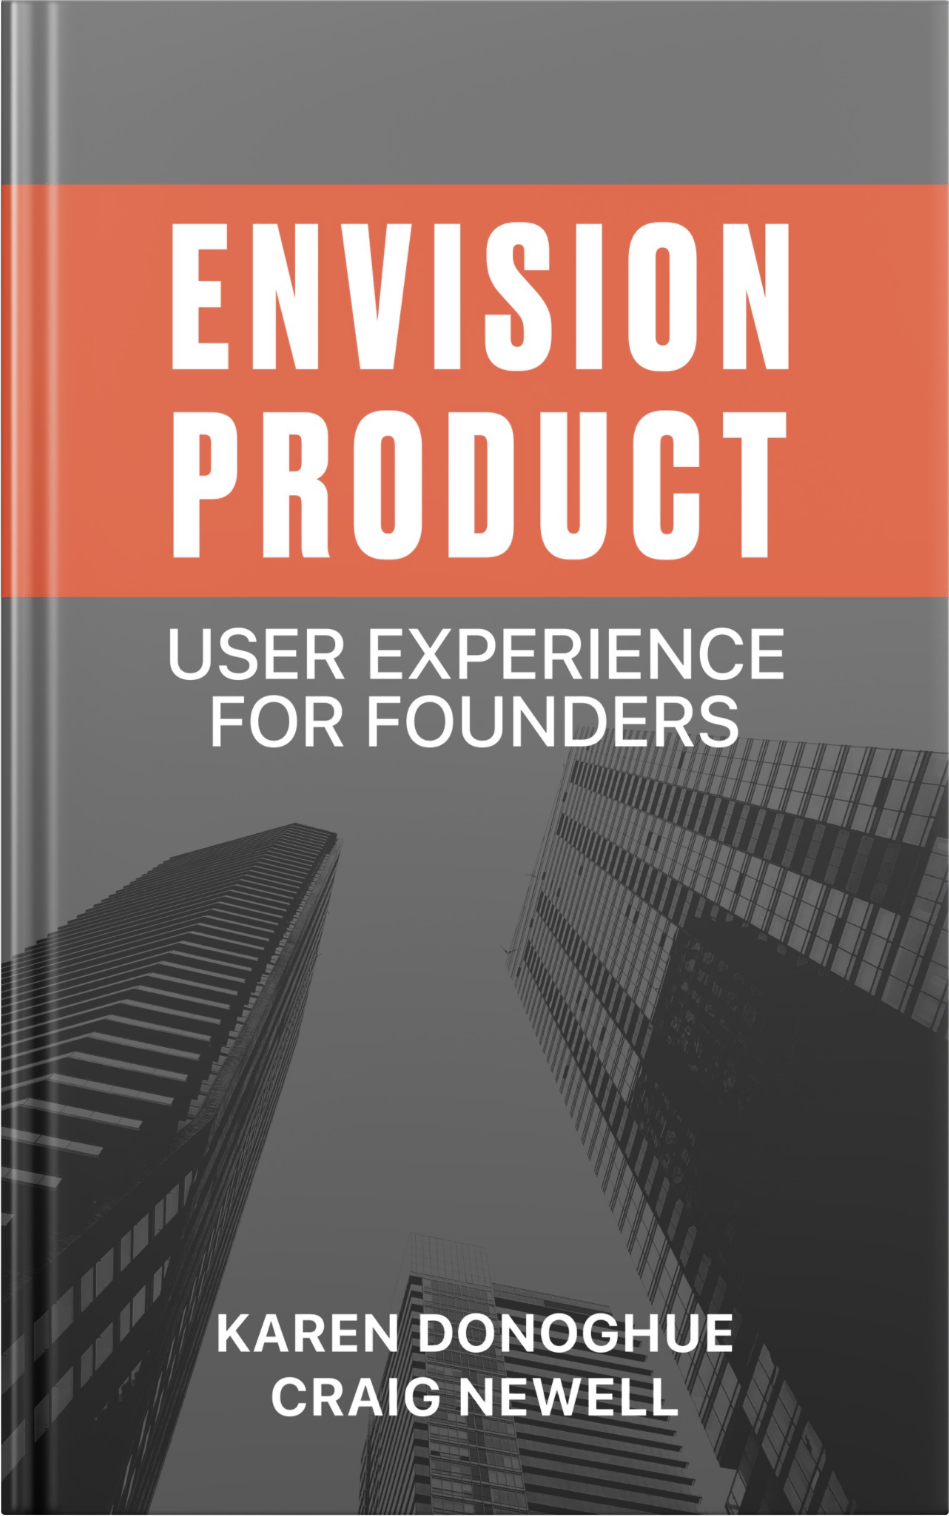 "Envision Product" by Karen Donoghue and Craig Newell